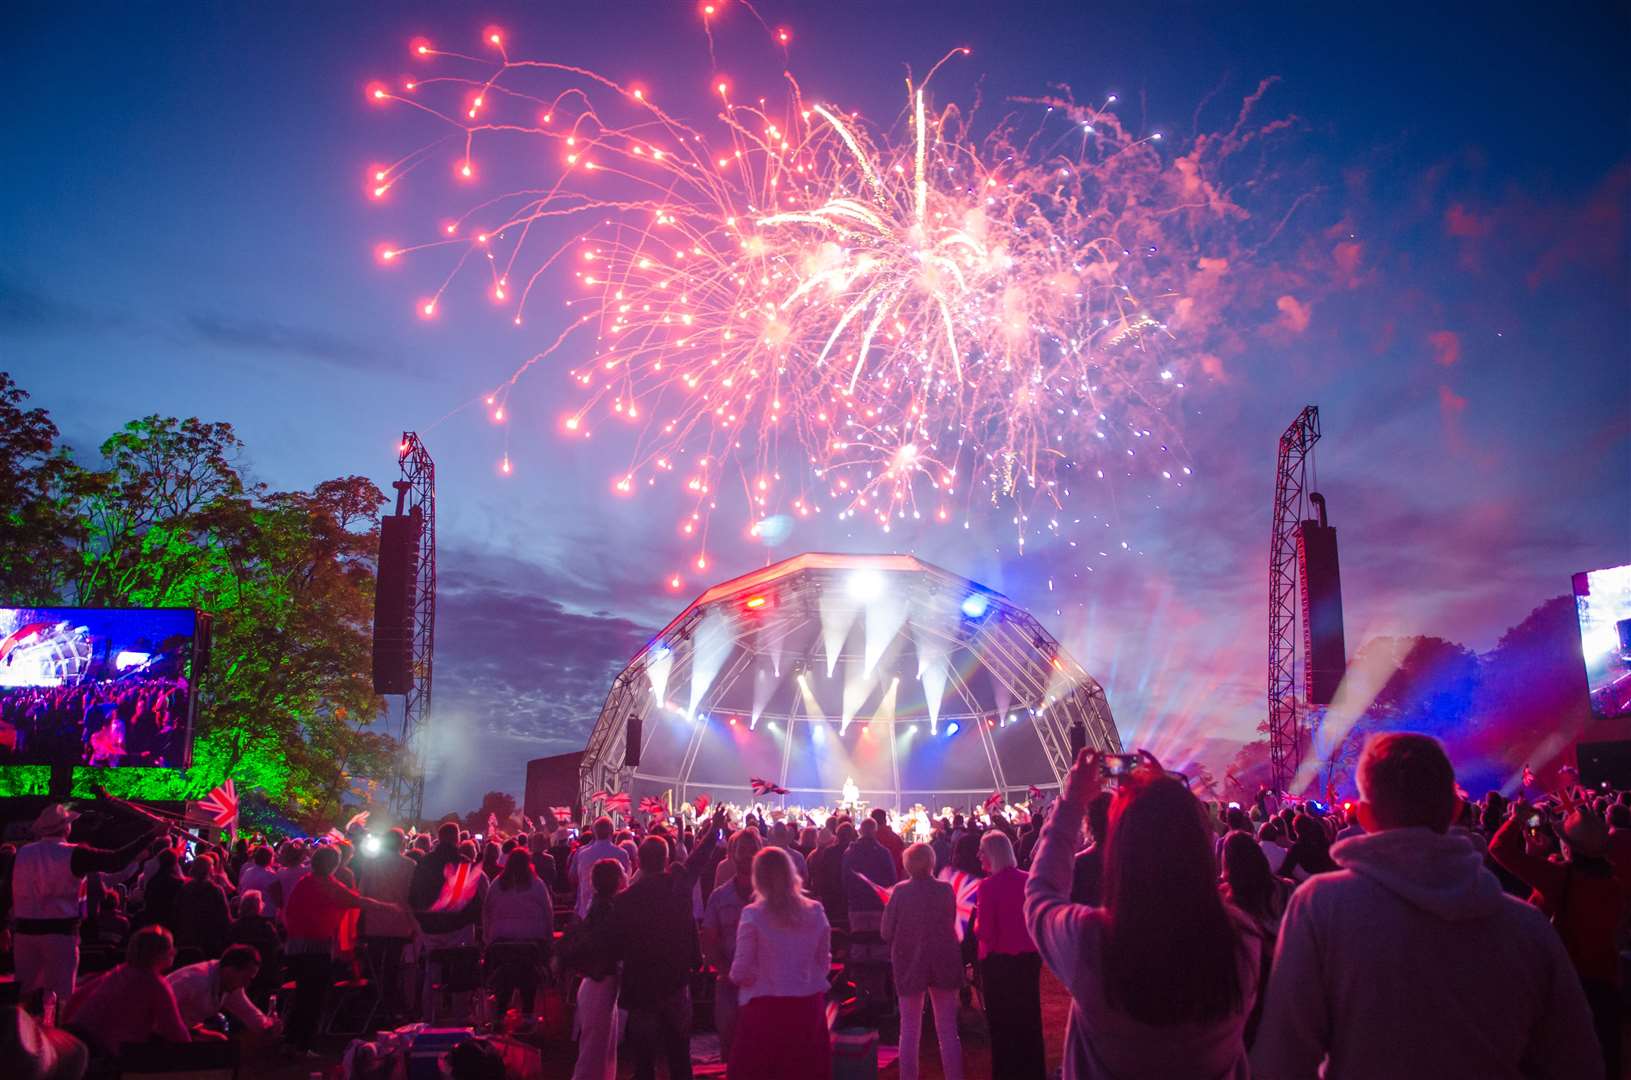 The Leeds Castle Concert will be back in 2021